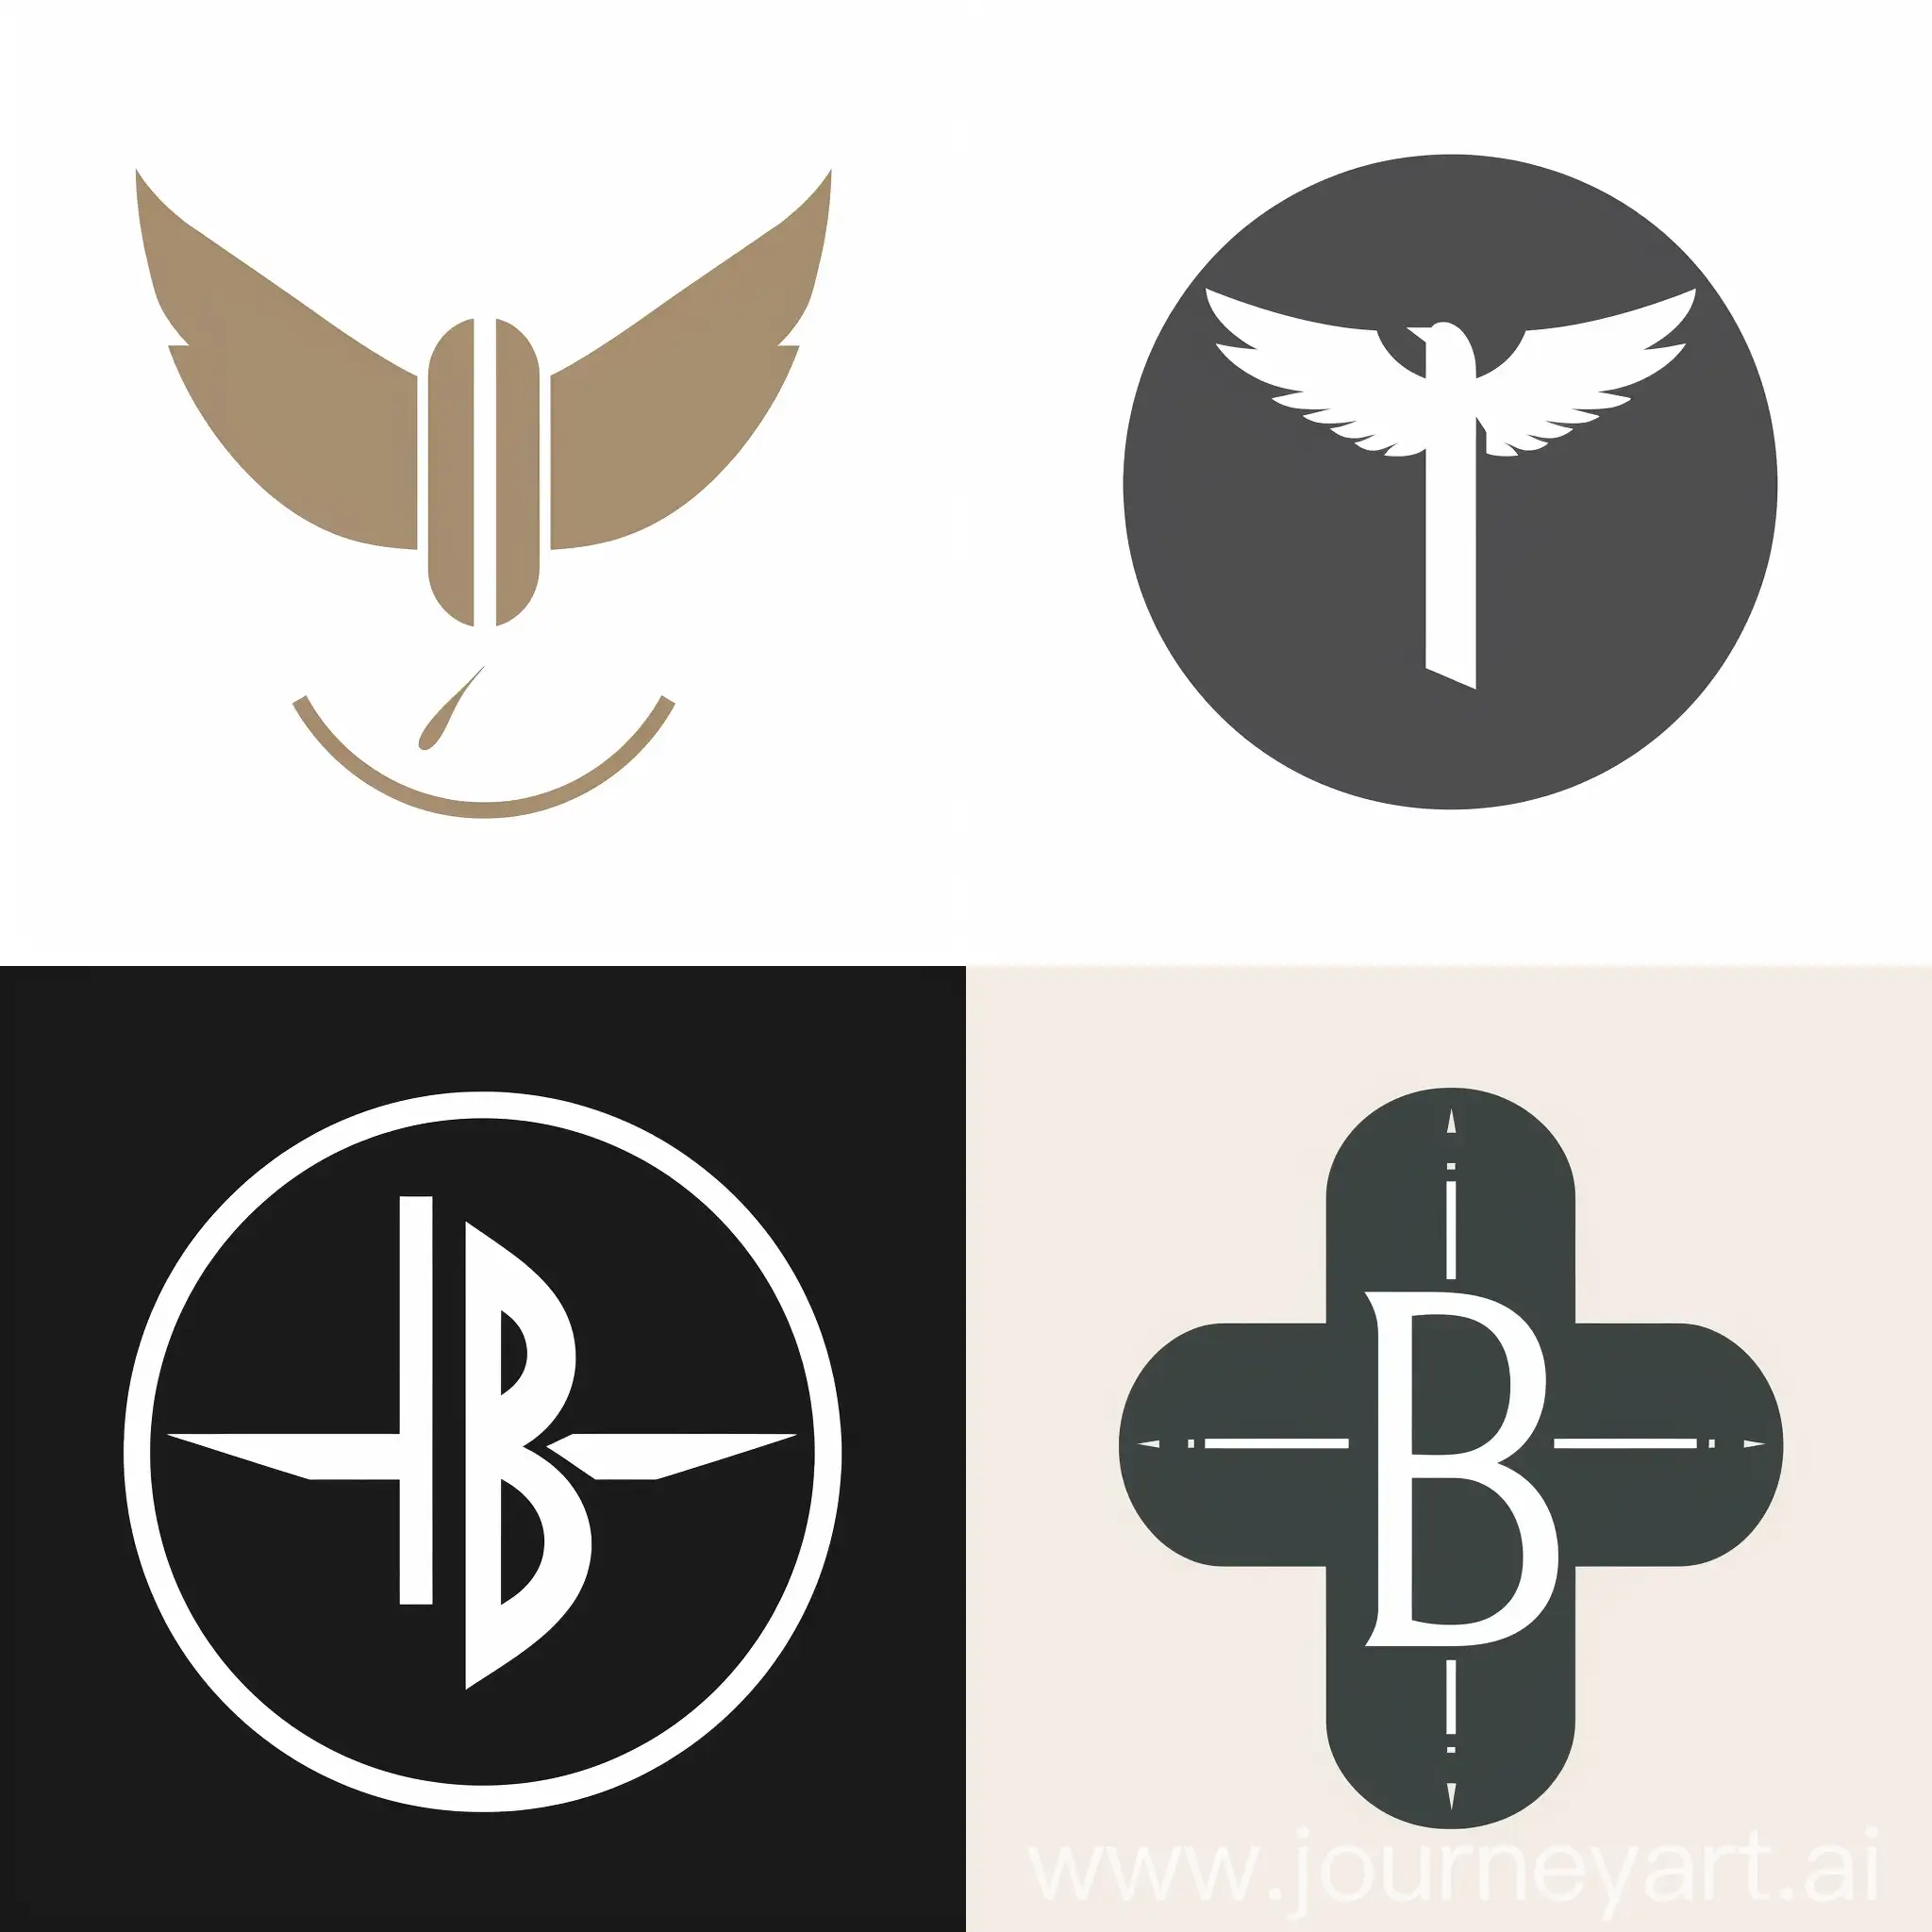  A modern and minimalist logo featuring a stylized letter "B" symbolizing "Blessing". The "B" is elegantly designed, resembling a cross at the top representing Christian faith and spirituality, while transforming into a flying dove at the bottom symbolizing the Holy Spirit and divine peace. Integrated with the "B" is a simple and minimalistic cross signifying sacrifice and redemption, and a white dove emerging from the bottom symbolizing the Holy Spirit, peace, and purity. Subtle flames surround the "B" symbolizing divine presence, purification, and spiritual passion. Grains of wheat and a wine glass placed beside the "B" represent the Eucharist, communion, and Christ's presence. Golden drops falling from the top of the "B" suggest olive oil symbolizing anointing, healing, and consecration. The color scheme includes a white background for purity and spirituality, celestial blue for the "B" representing tranquility and faith, golden for the cross symbolizing divinity, white with hints of blue for the dove representing purity and the Holy Spirit, warm orange and yellow tones for the fire, golden brown for wheat, and deep purple for wine. Photography with a macro lens to capture intricate details, --ar 1:1 --v 5